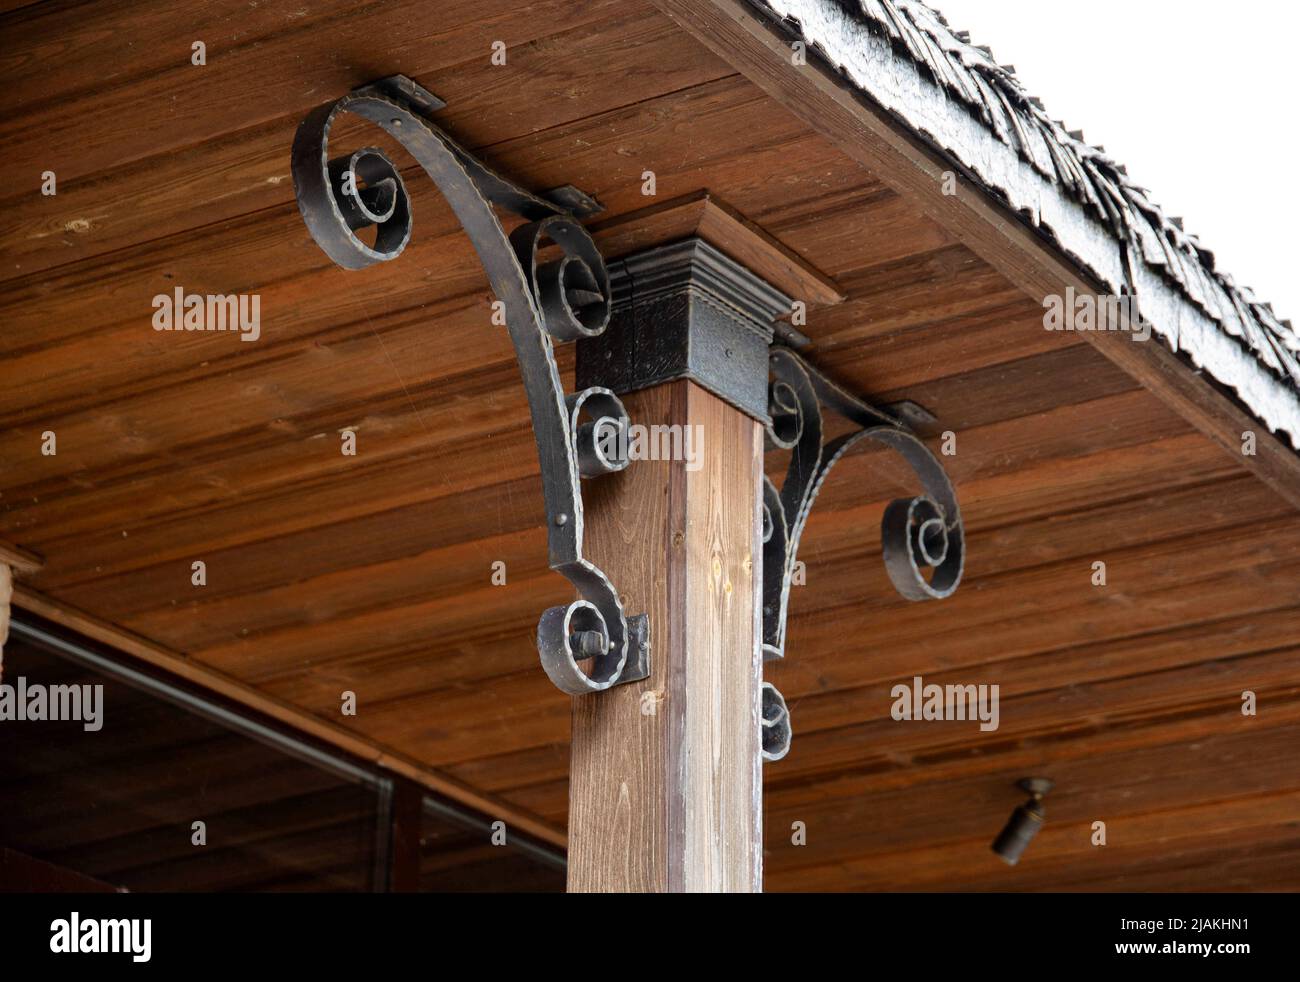 A metal corner decoration that holds the roof of the house and a wooden pillar post. Vintage design Stock Photo